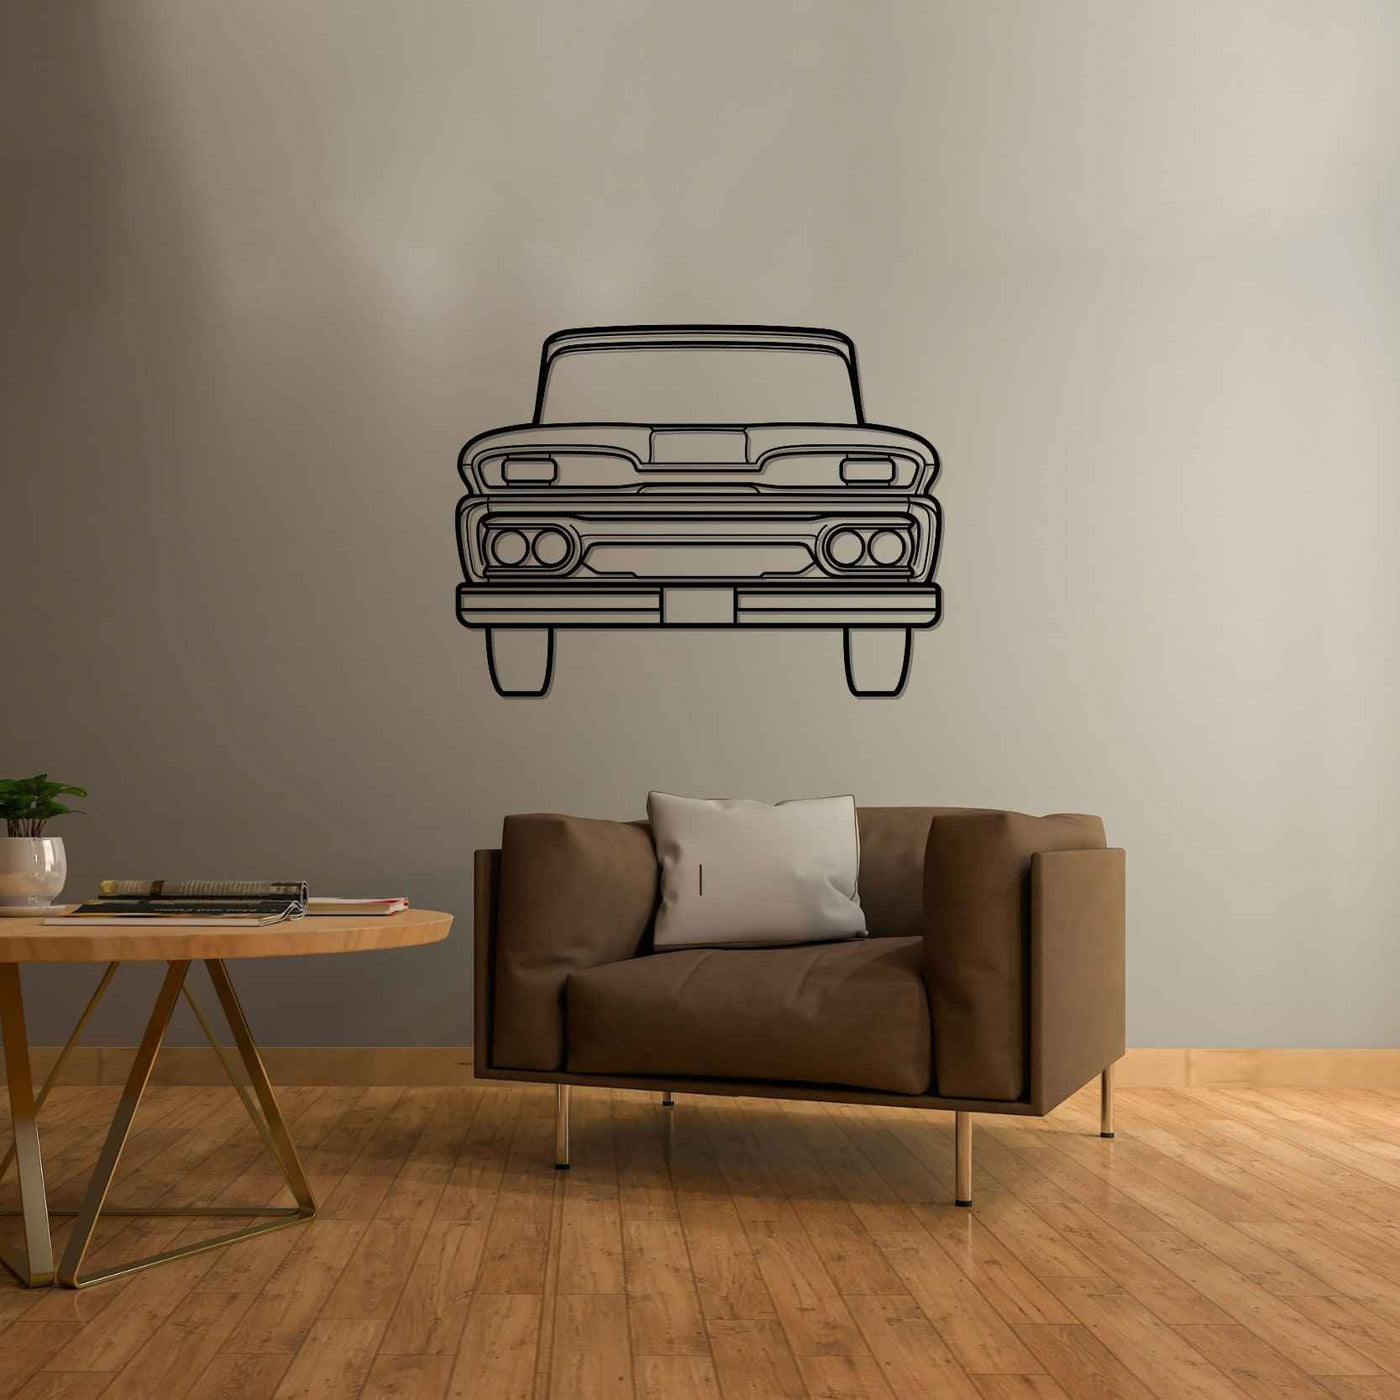 C10 1961 Front Silhouette Metal Wall Art